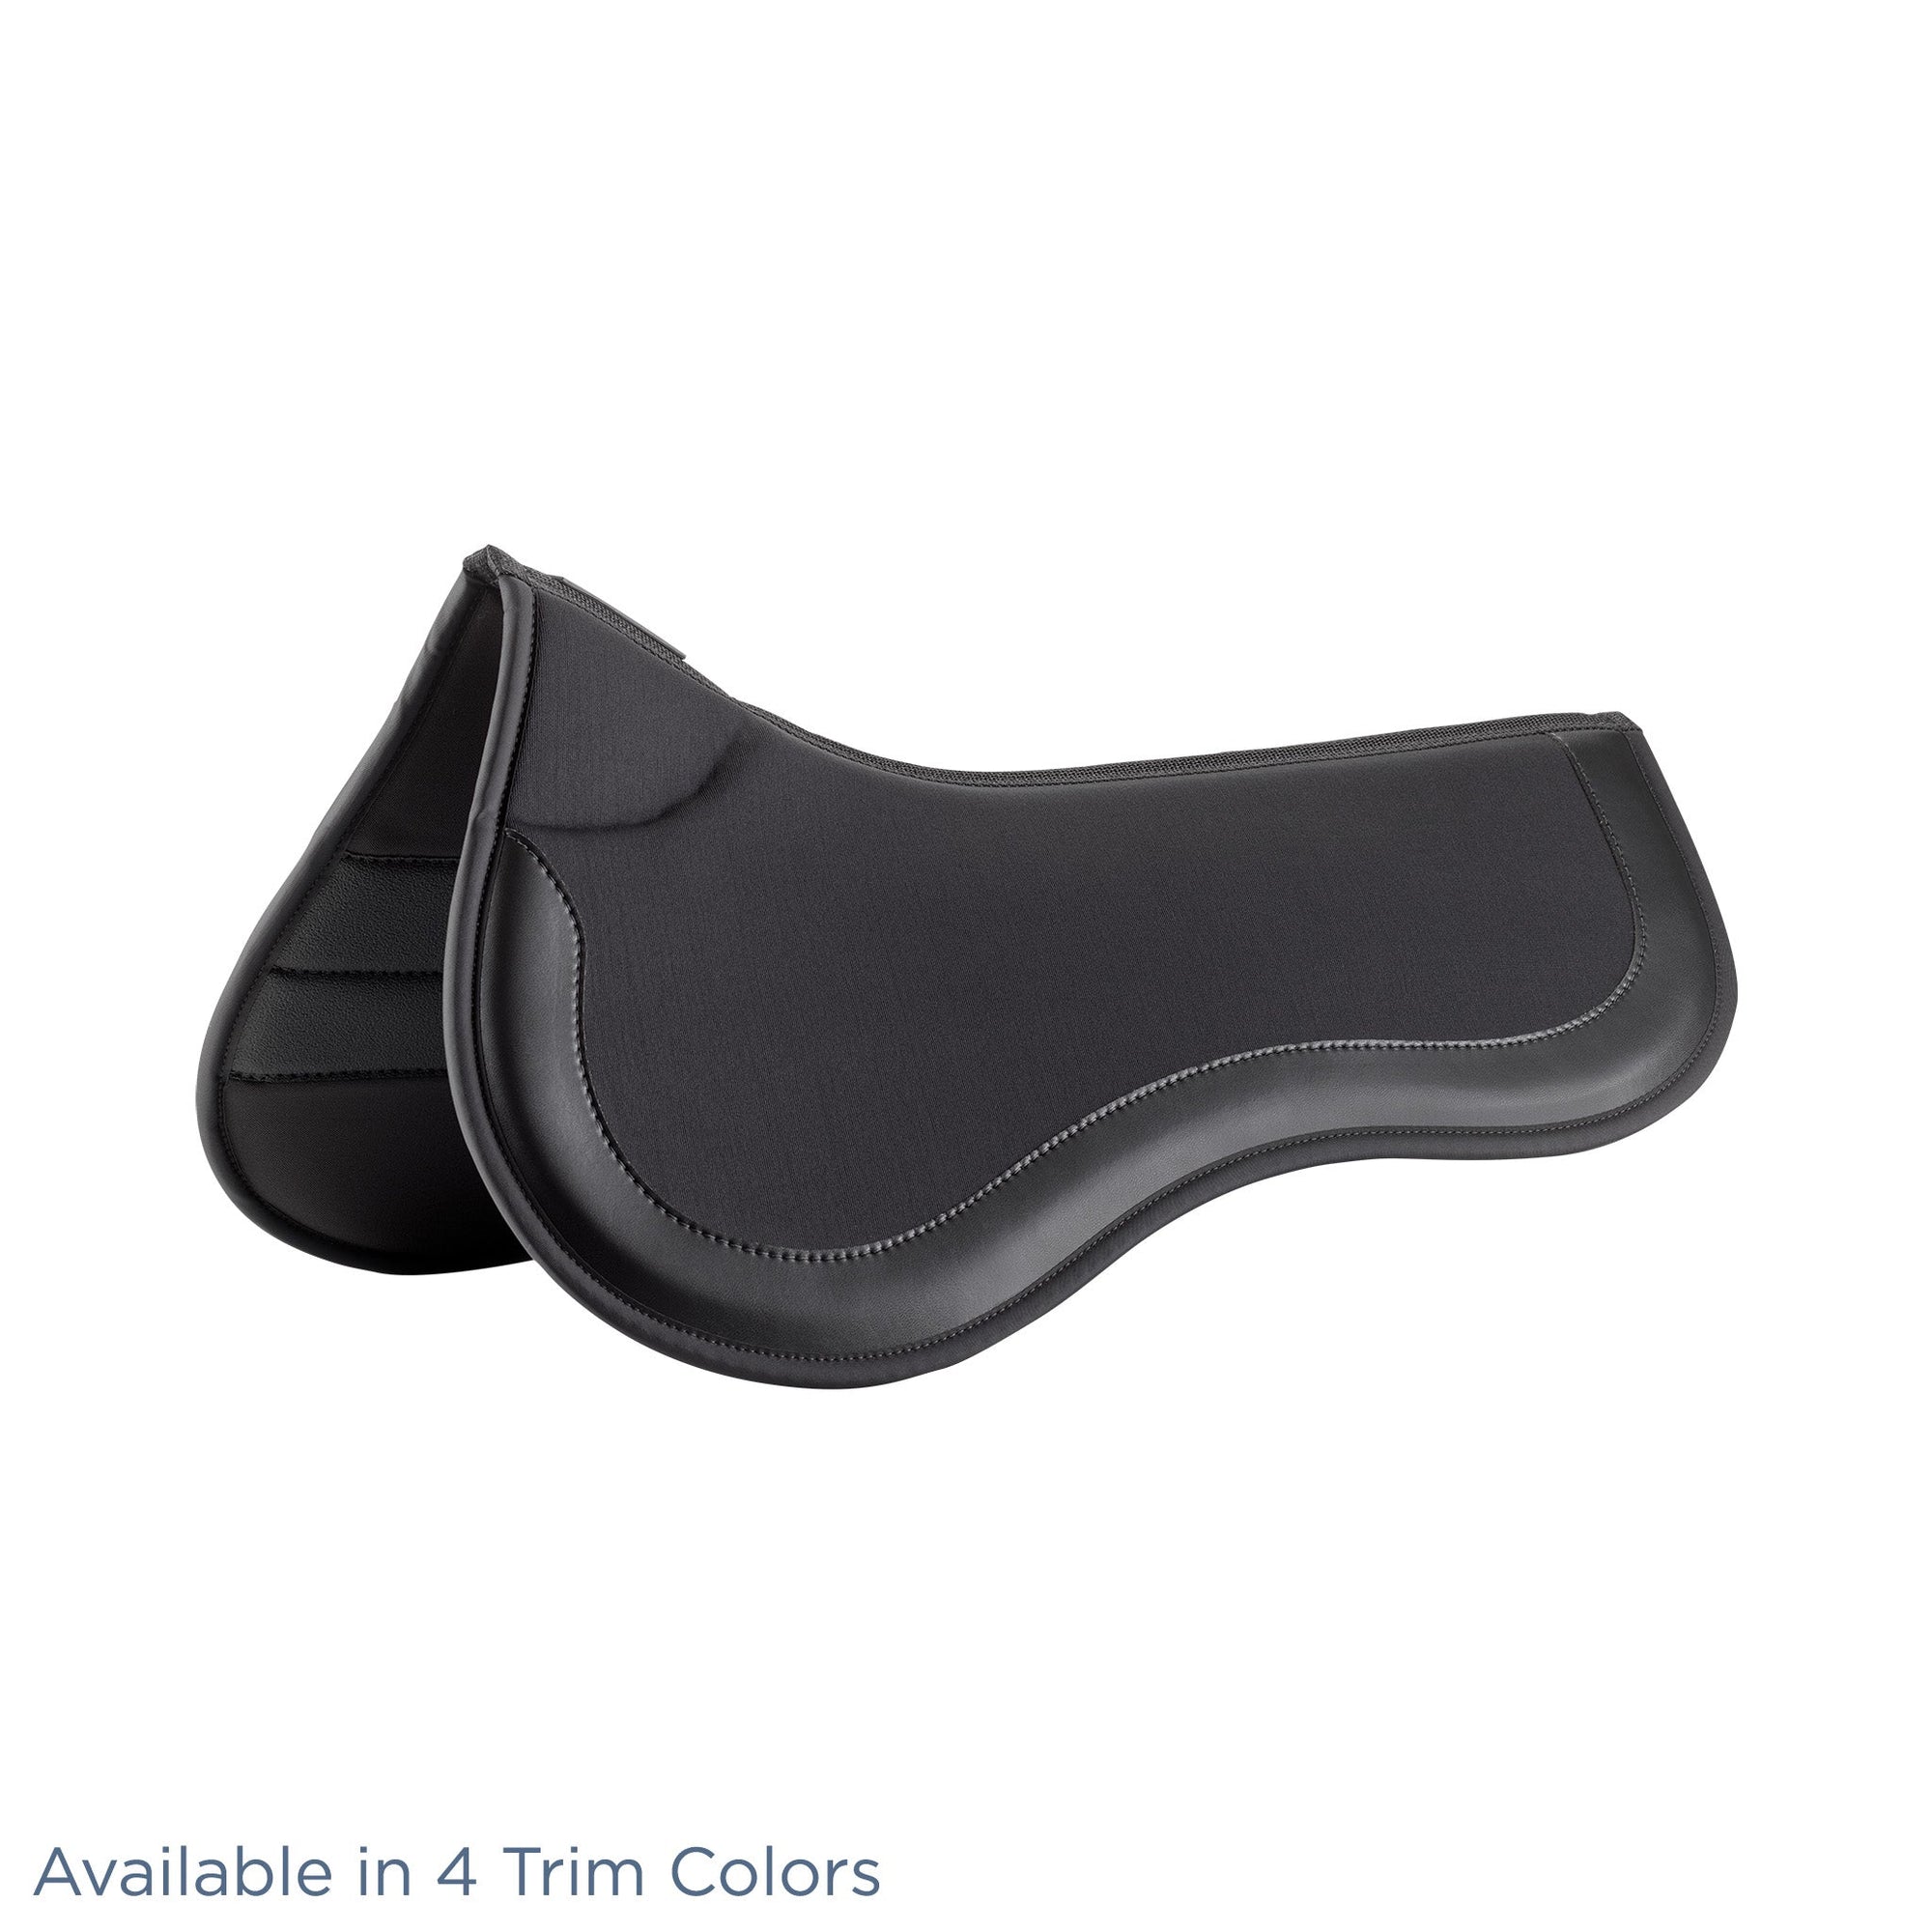 Thin ImpacTeq Half Pad Available in four trim colors